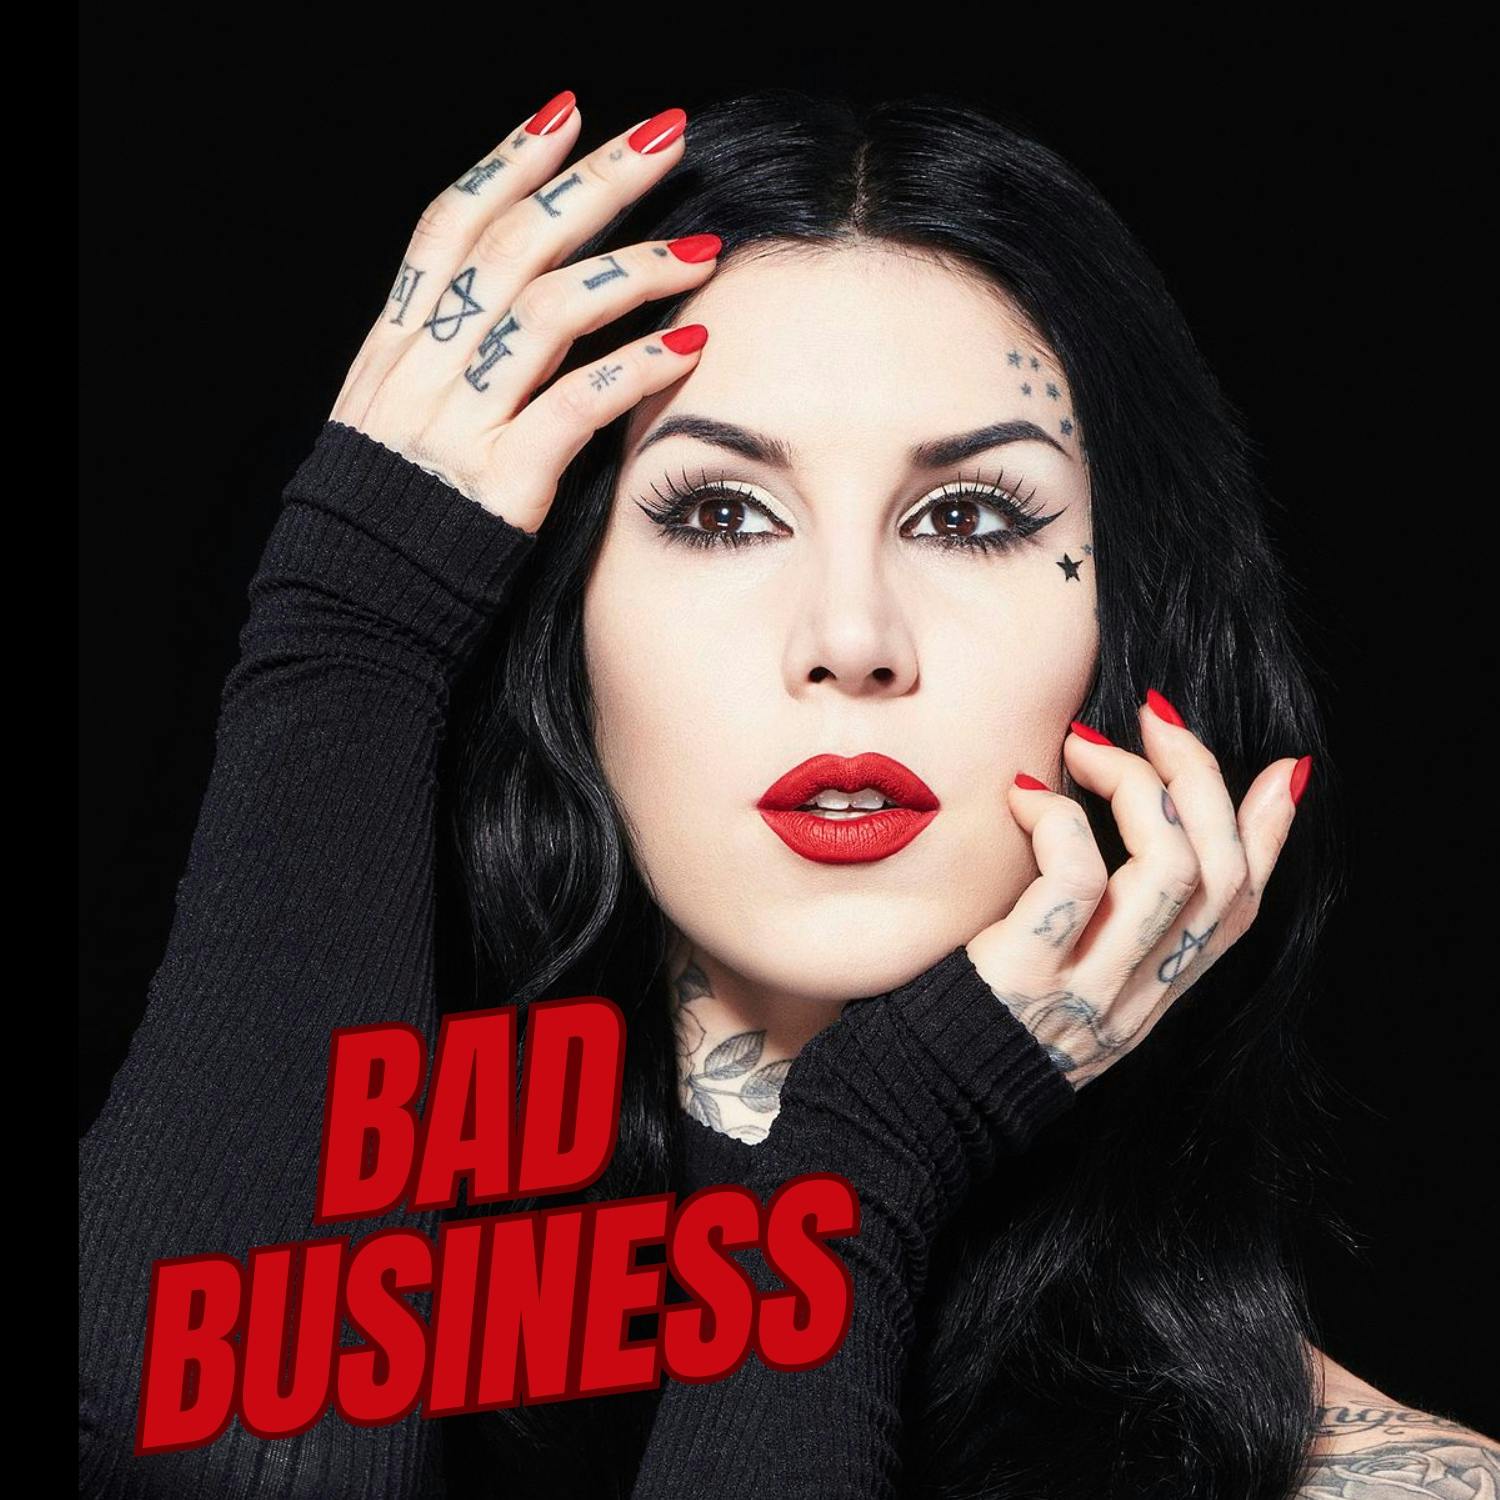 Kat Von D on Good Business and Bad Contracts